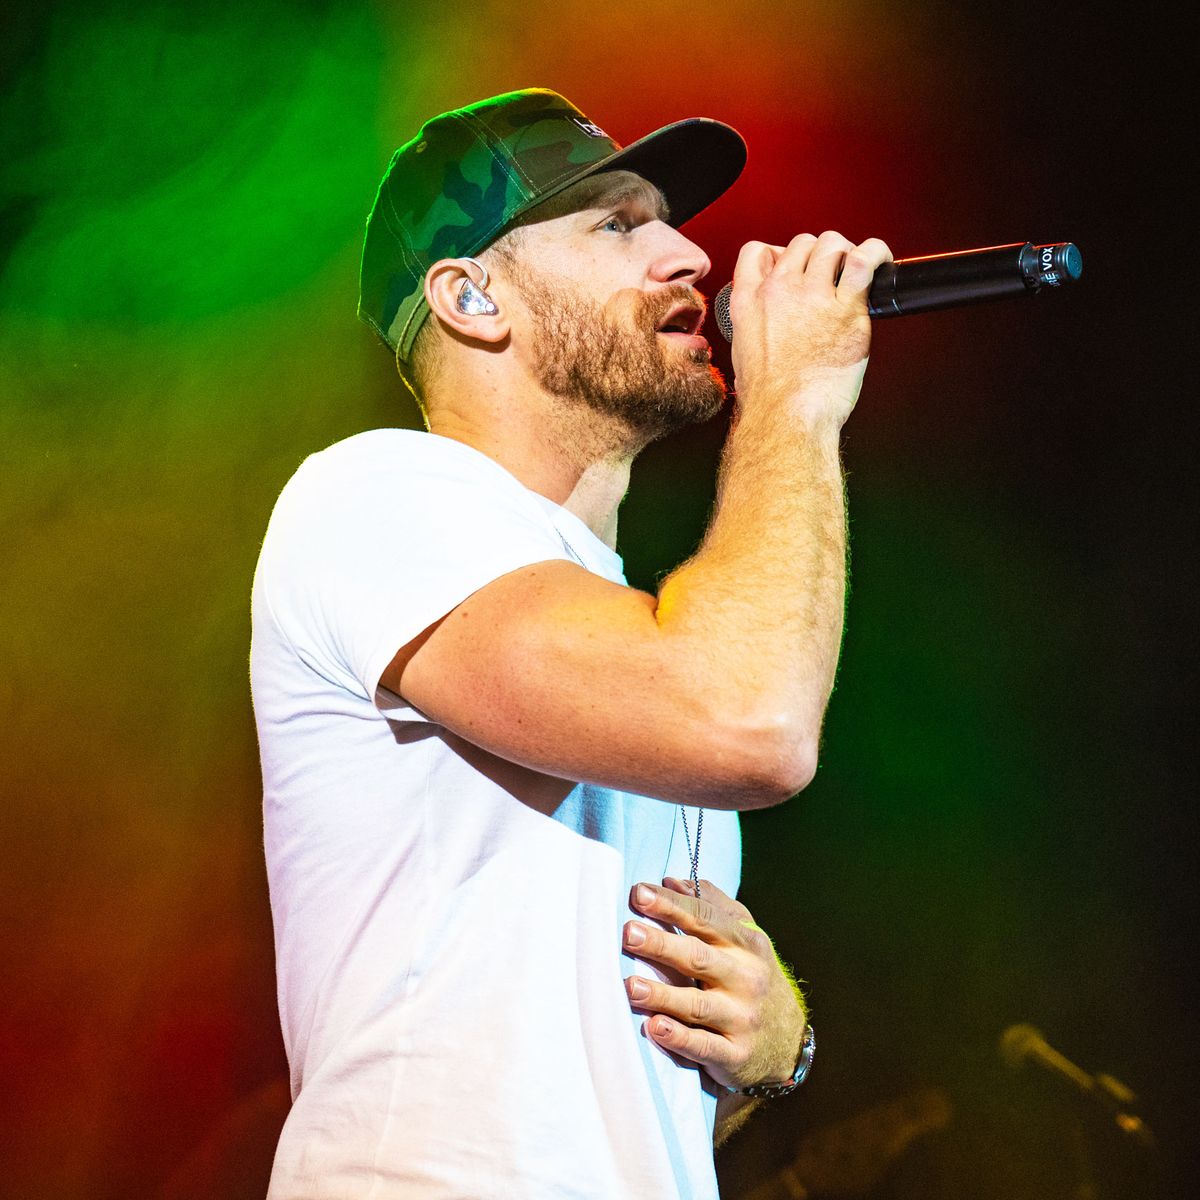 Chase Rice And Chris Janson Pack Concerts During Coronavirus